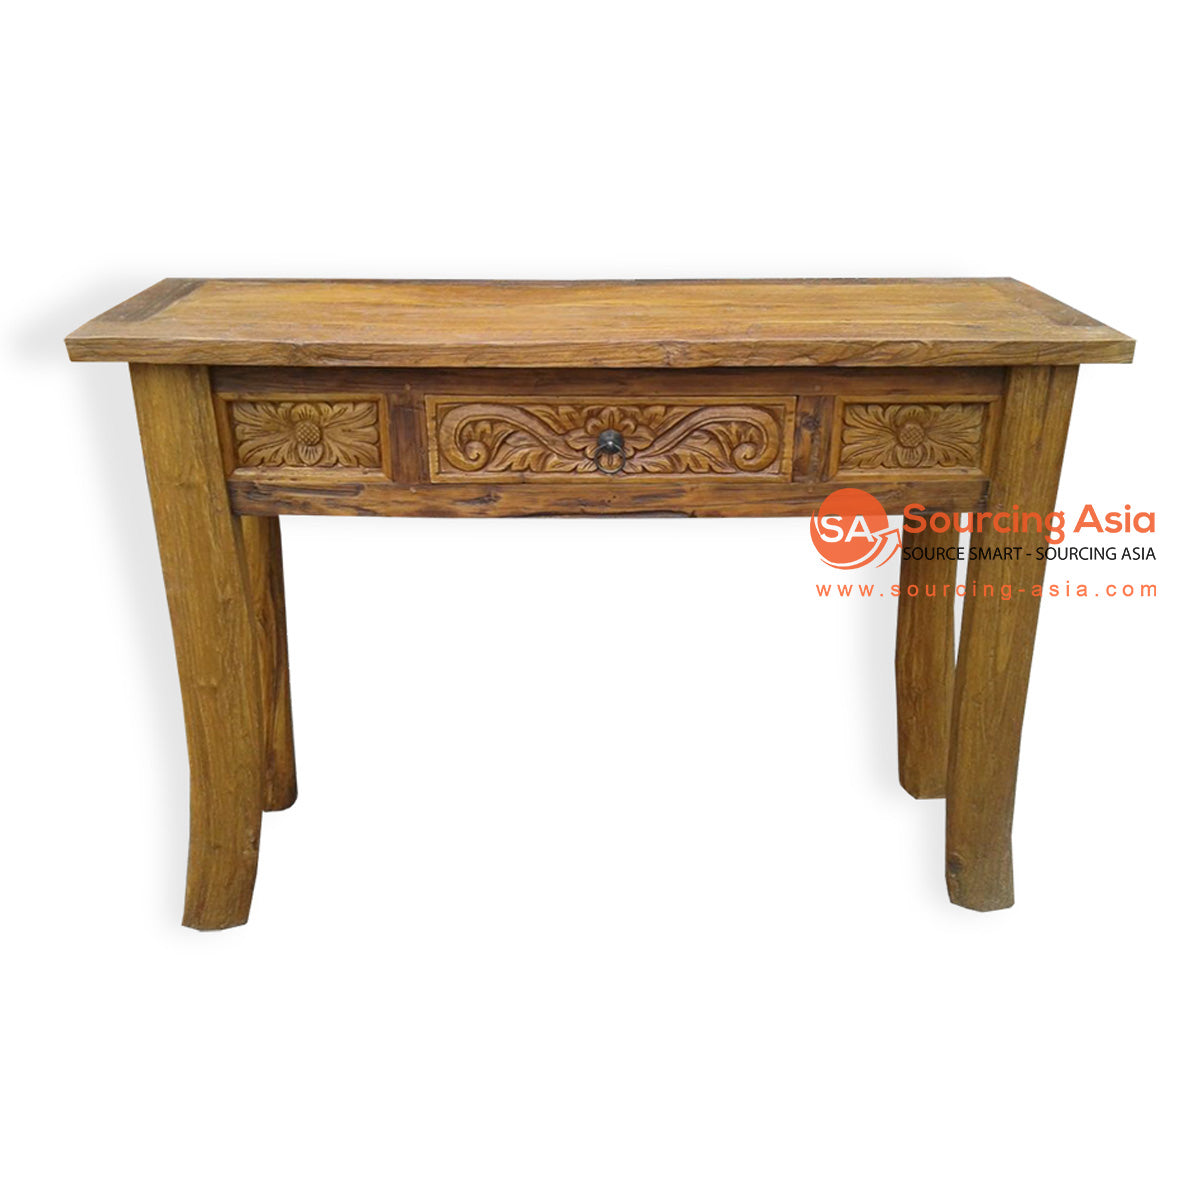 LAC053 NATURAL TEAK WOOD ONE DRAWER CARVED SMALL CONSOLE